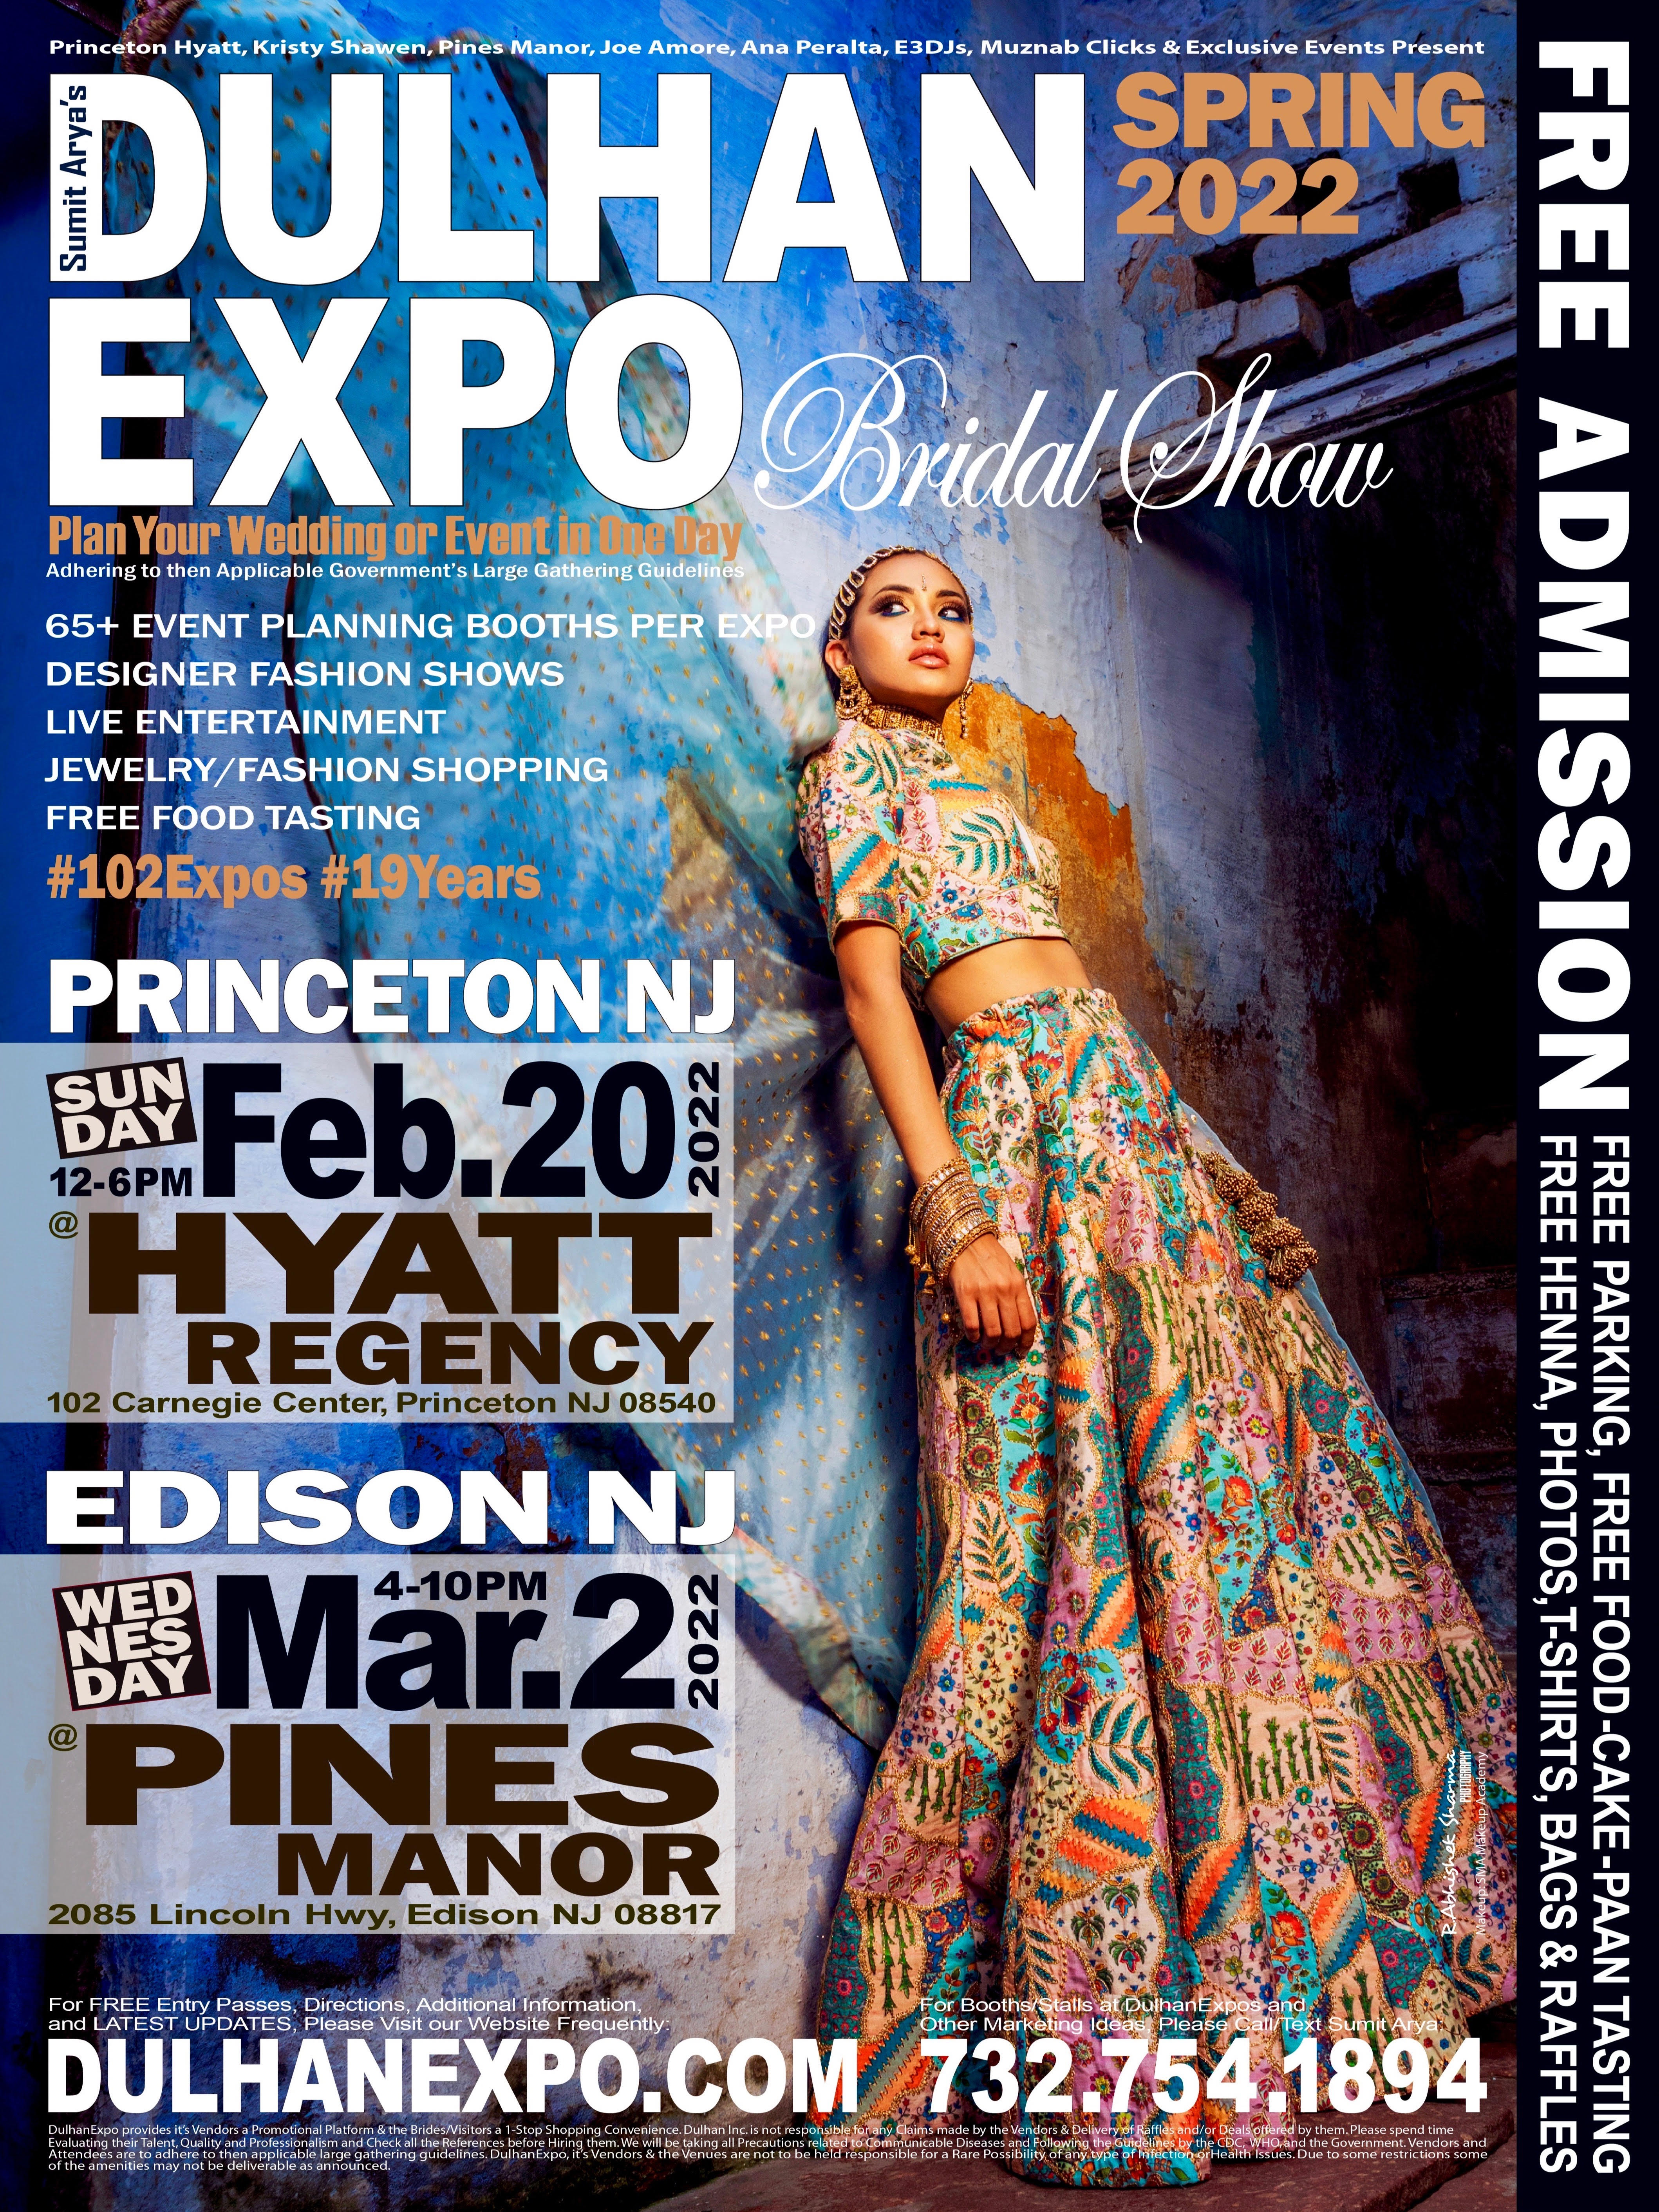 DulhanExpo Bridal Show | March 2022